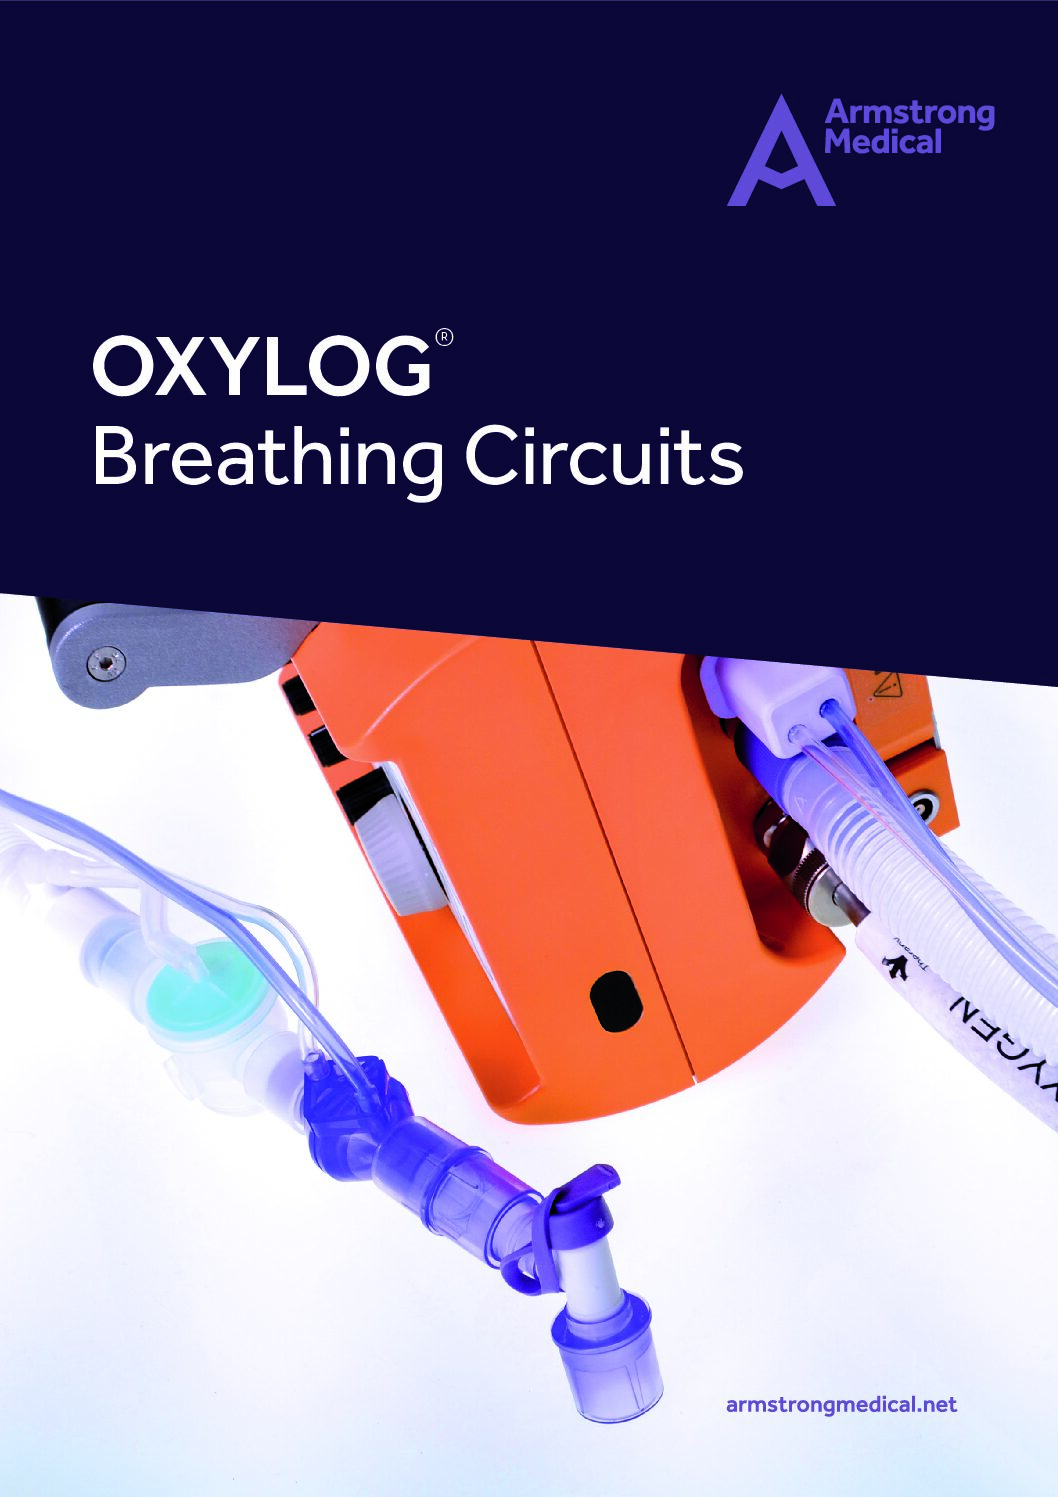 AM OXYLOG Breathing Circuits A4 Flyer pdf Armstrong Medical | Medical Device Manufacturer